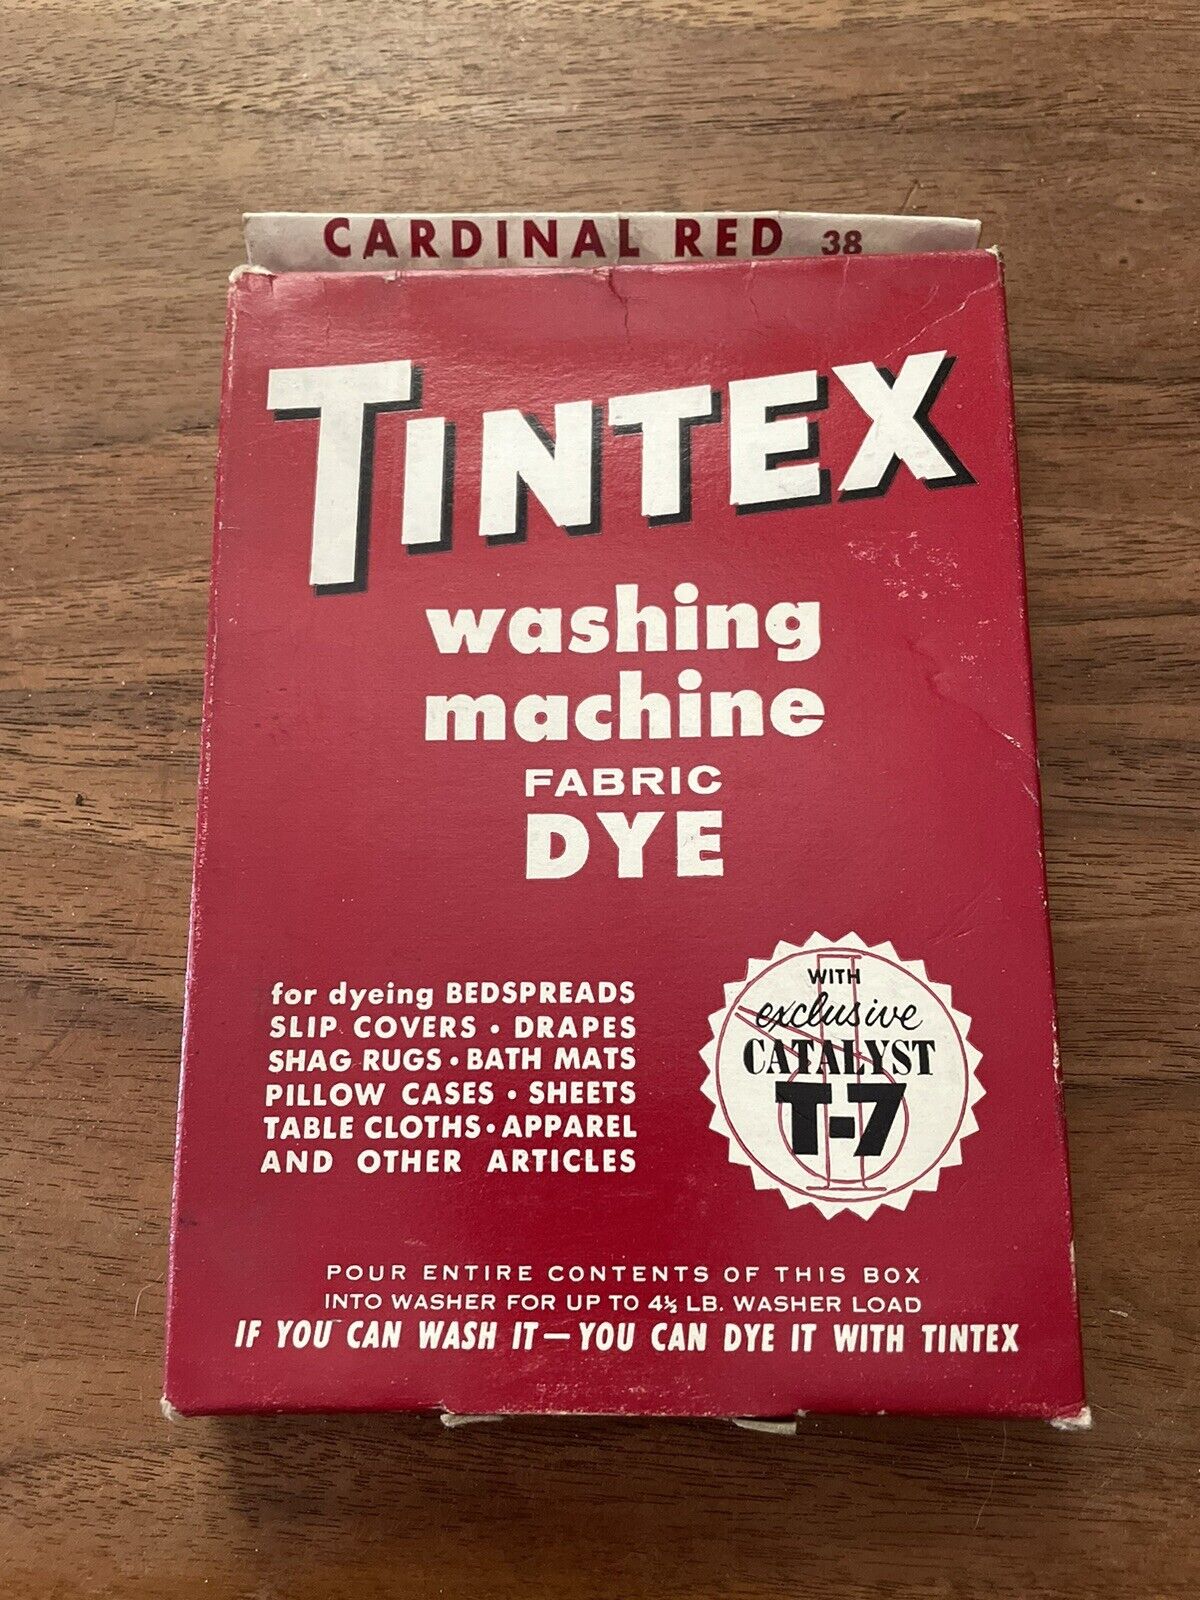 VTG TINTEX FABRIC DYE CARDINAL RED COLOR UNOPENED BOX 8oz DYES 4+LBS Advertising